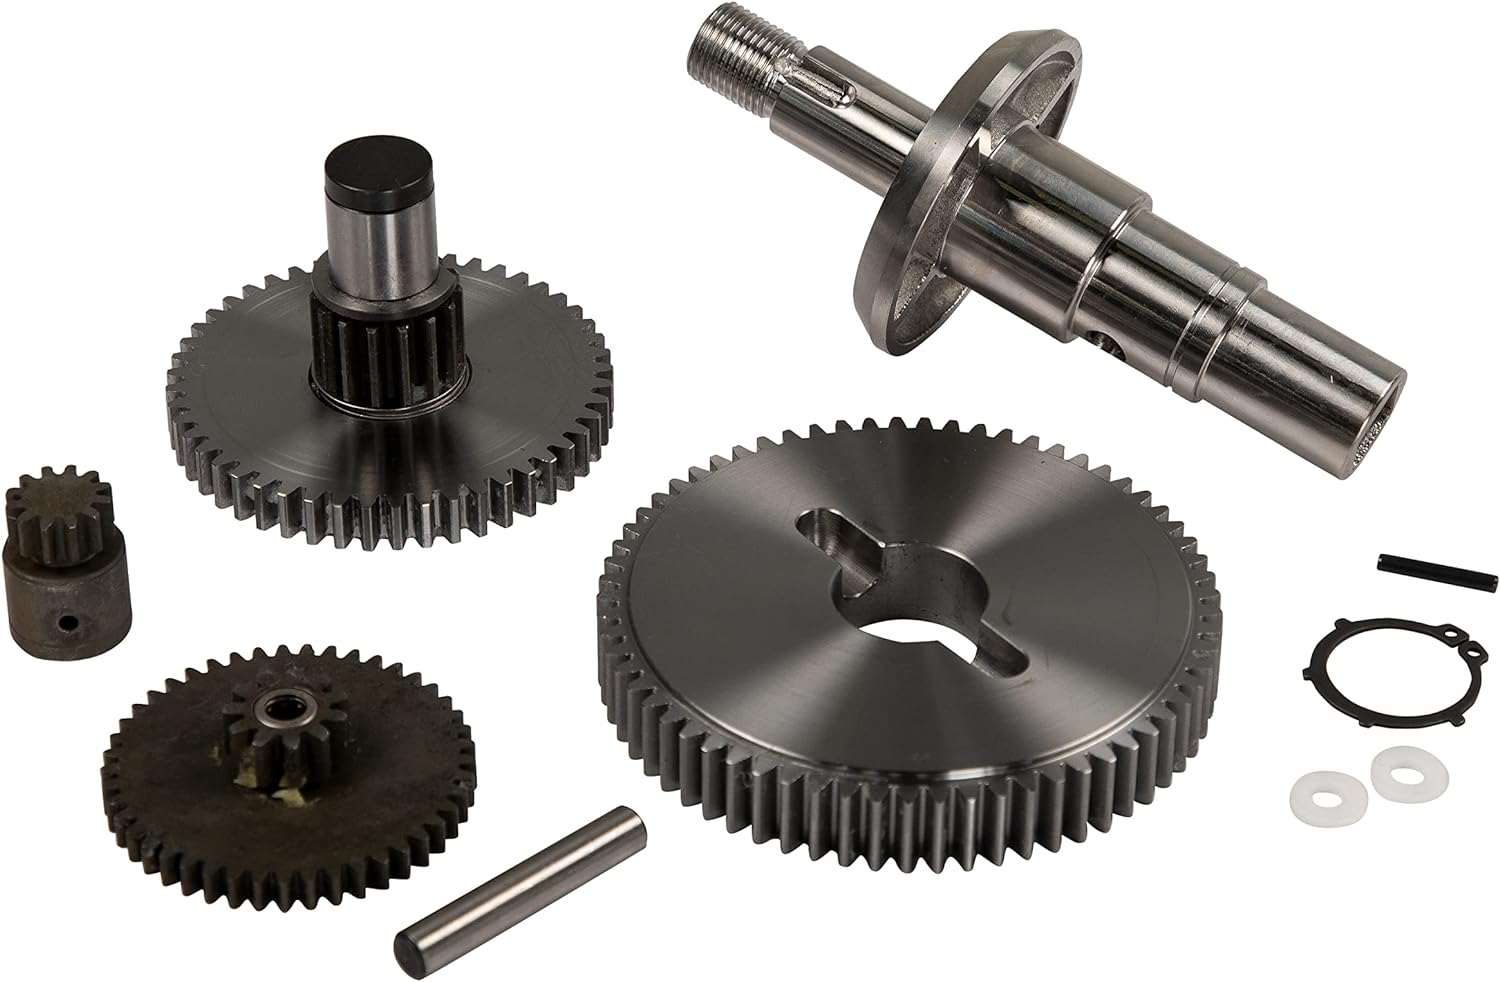 Lewmar 3rd Generation Replacement Gears/Shaft Kit for Pro-Series Boat Anchor Windlasses - 2020201008 - Lewmar Pro-Series Windlass Gear Replacement Kit Review